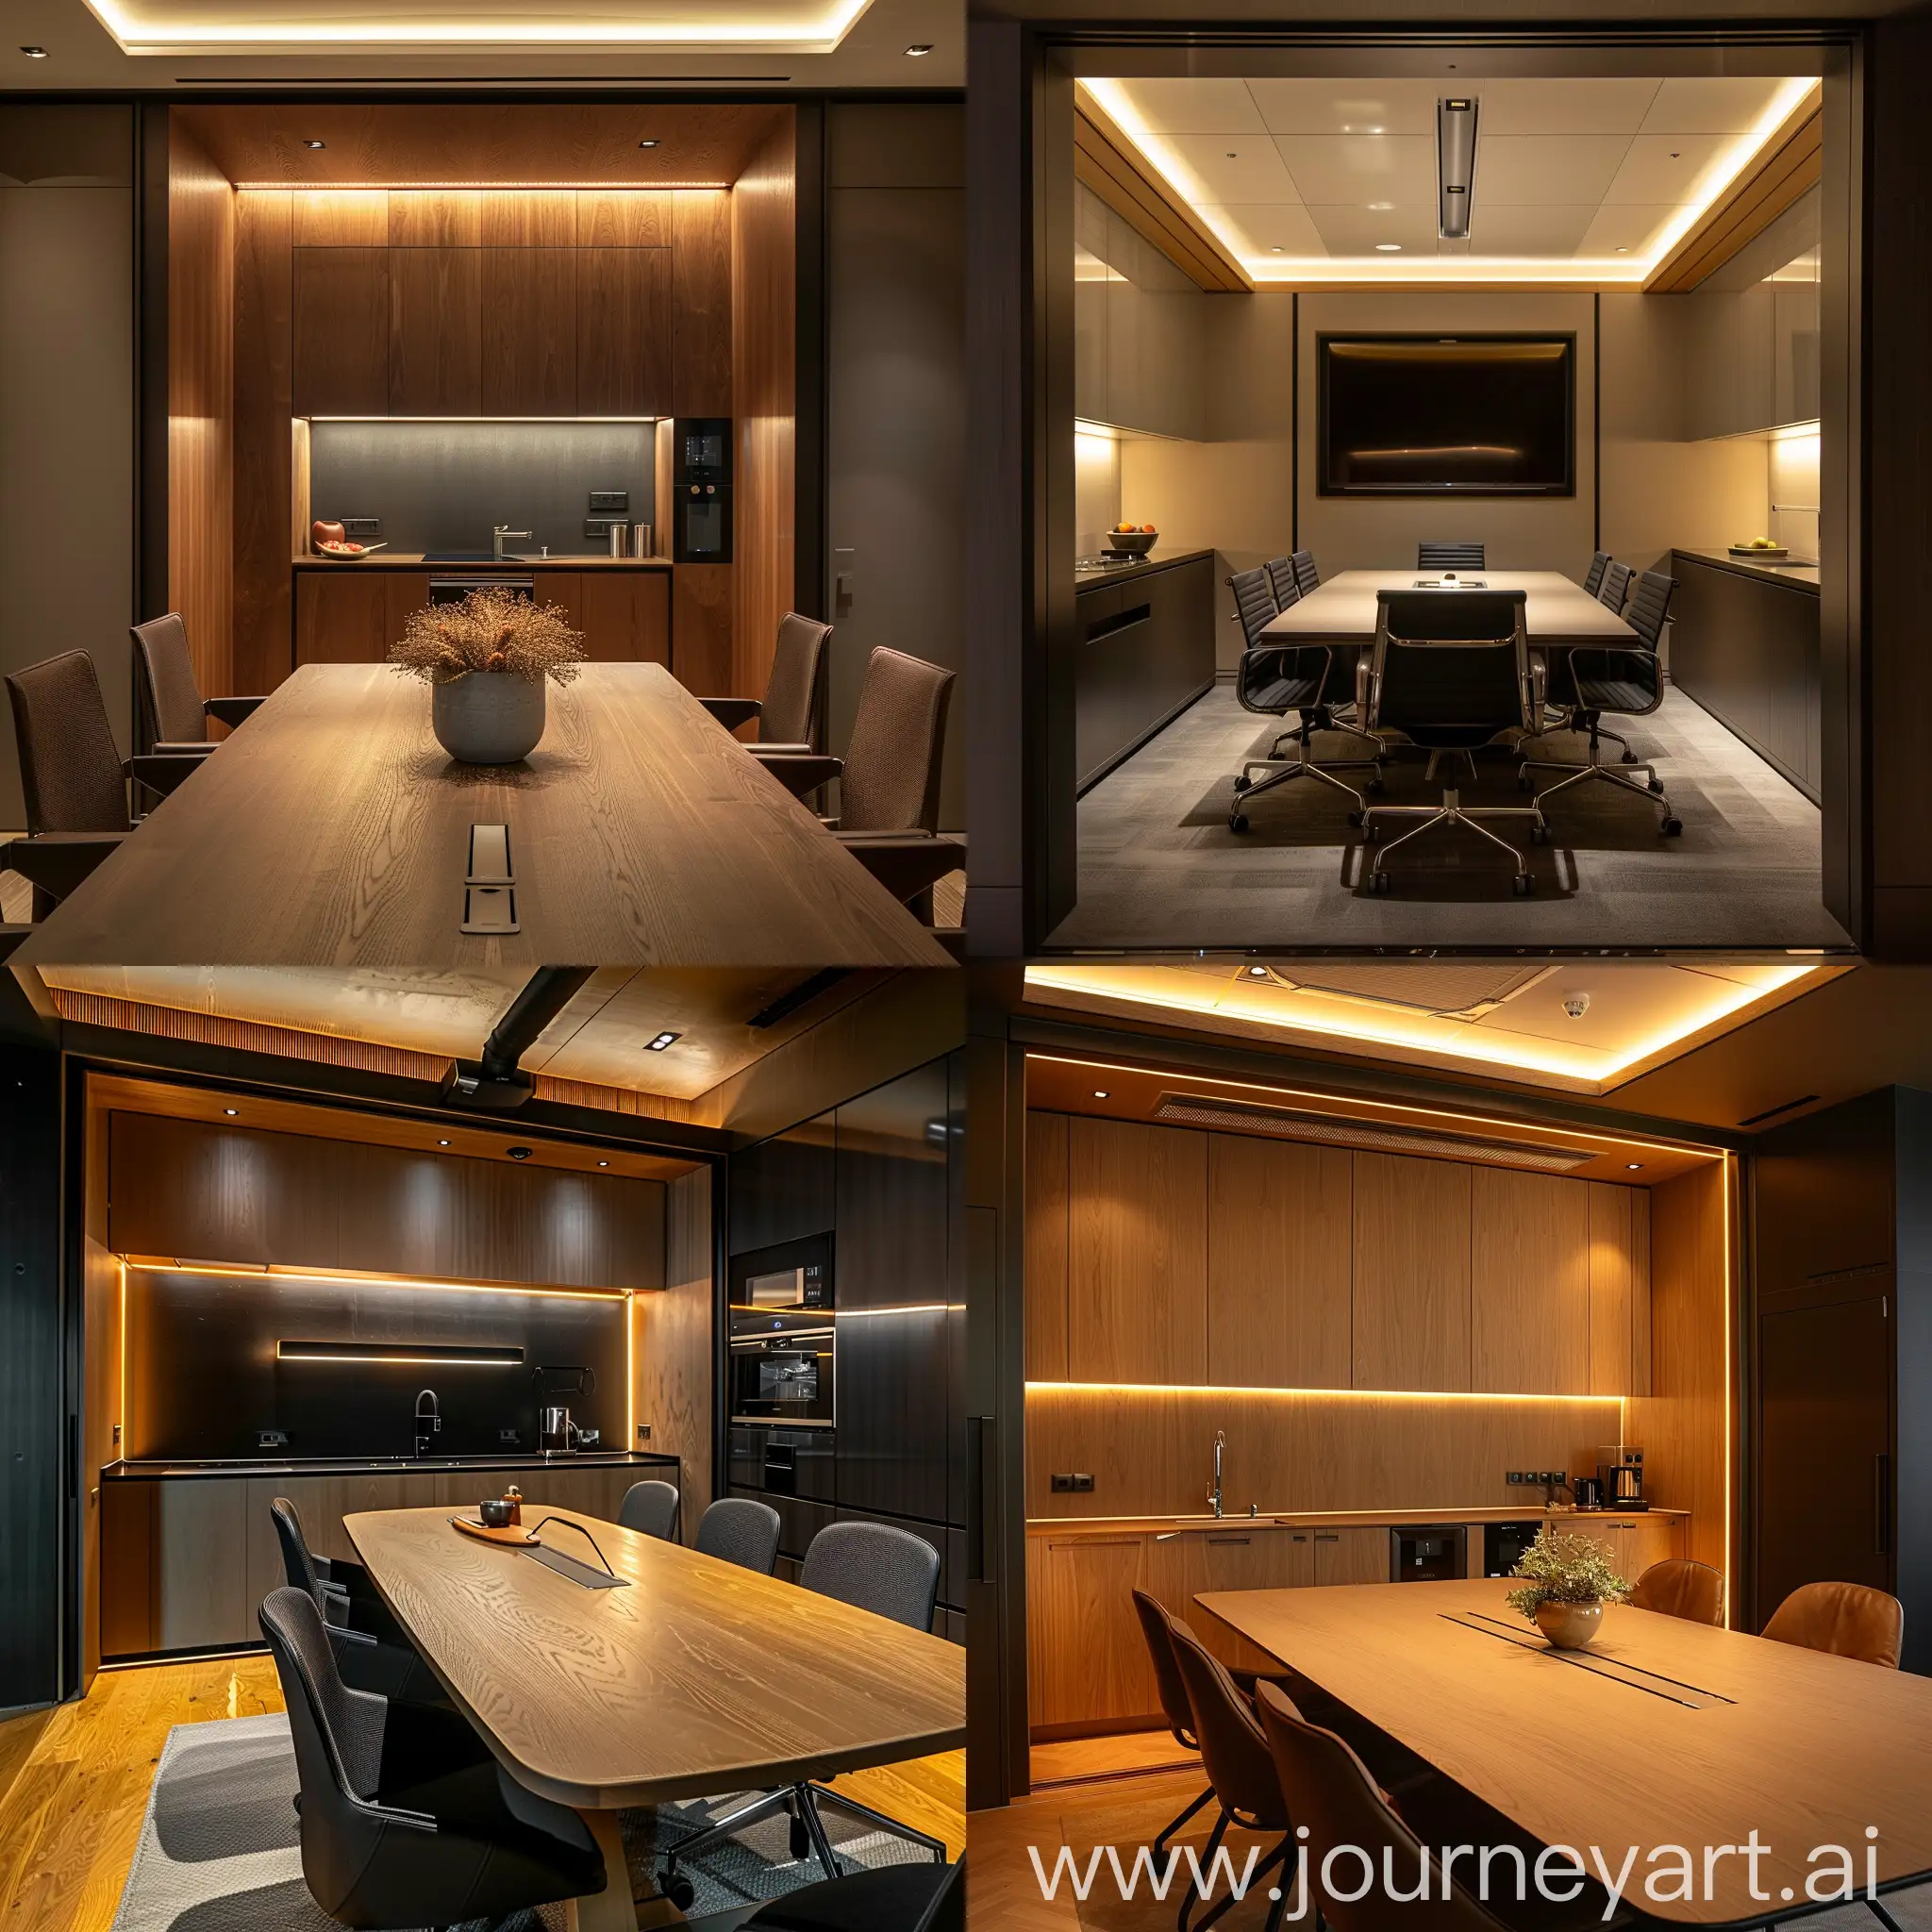 boardroom, 4-6 seater, wall to wall concealed kitchenette, dim lighting, 